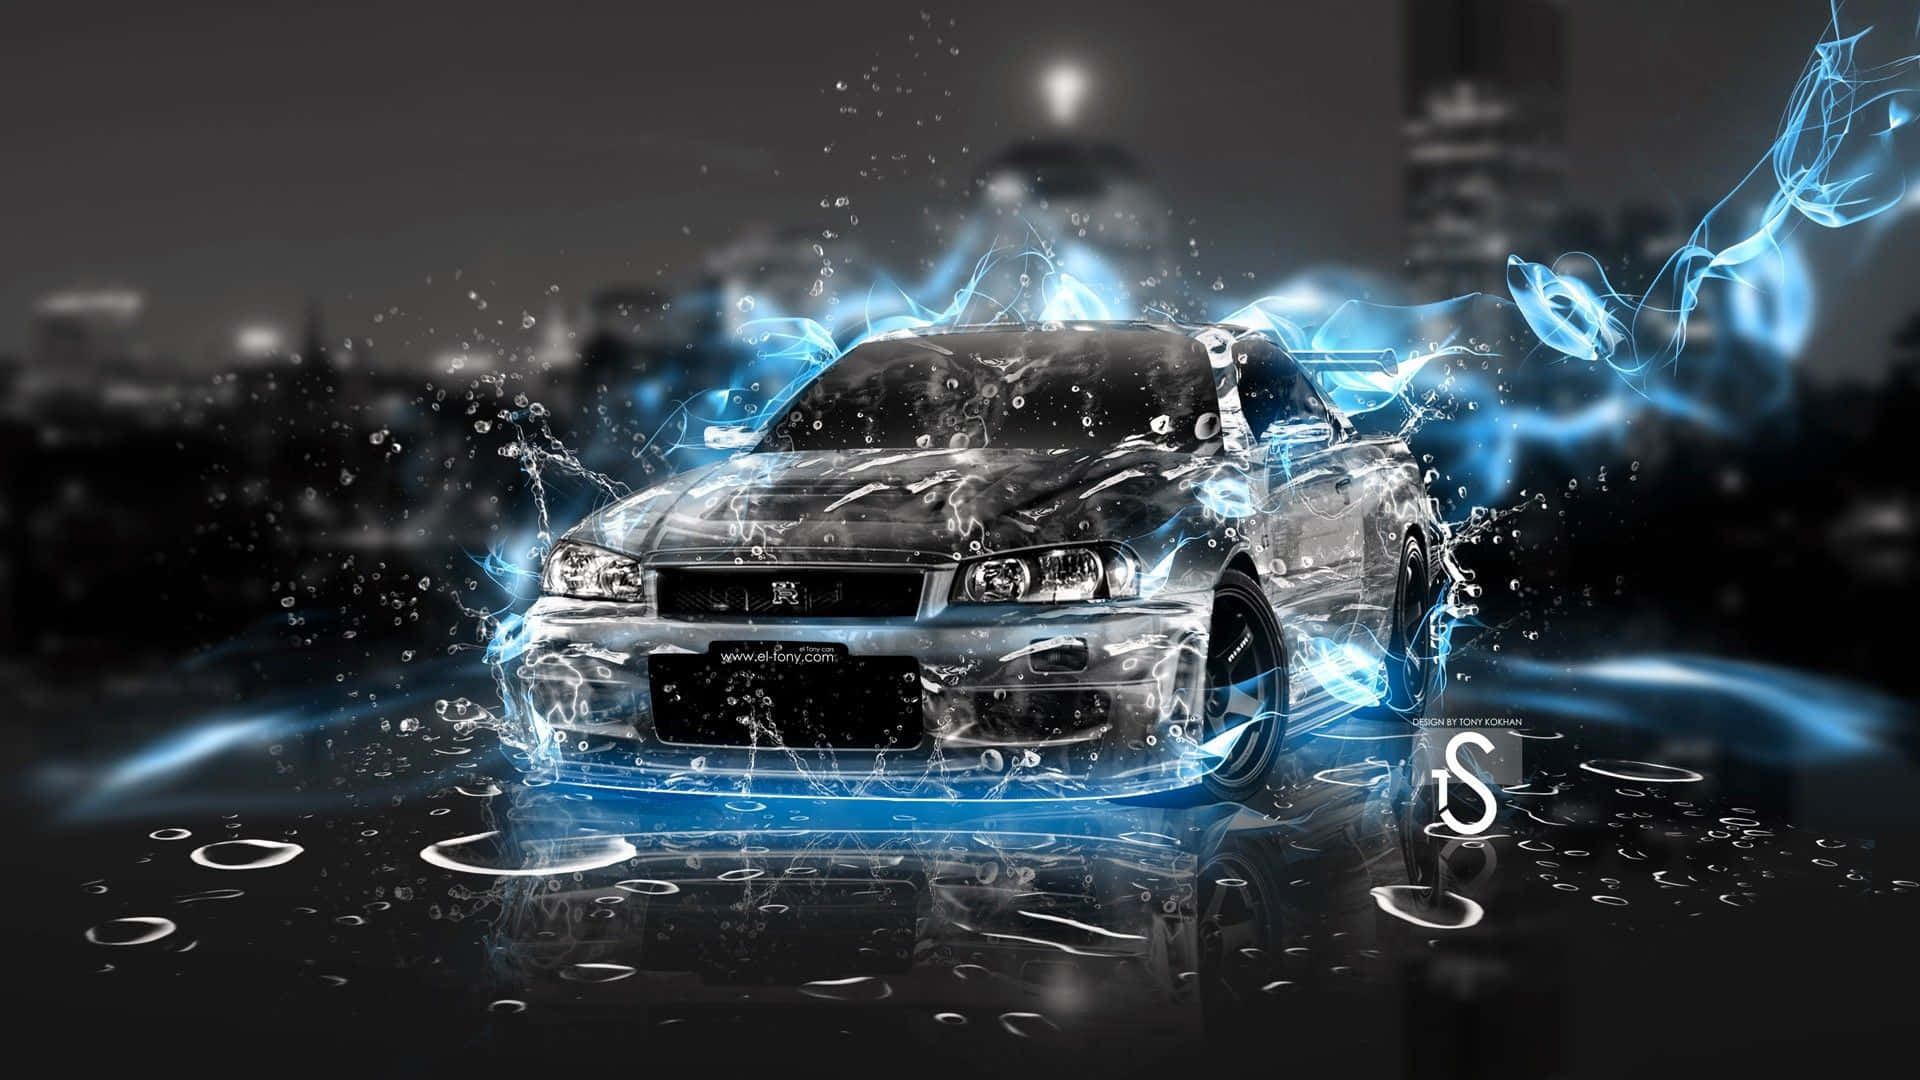 Get Ready To Take The Streets By Storm With This Cool Gtr Background